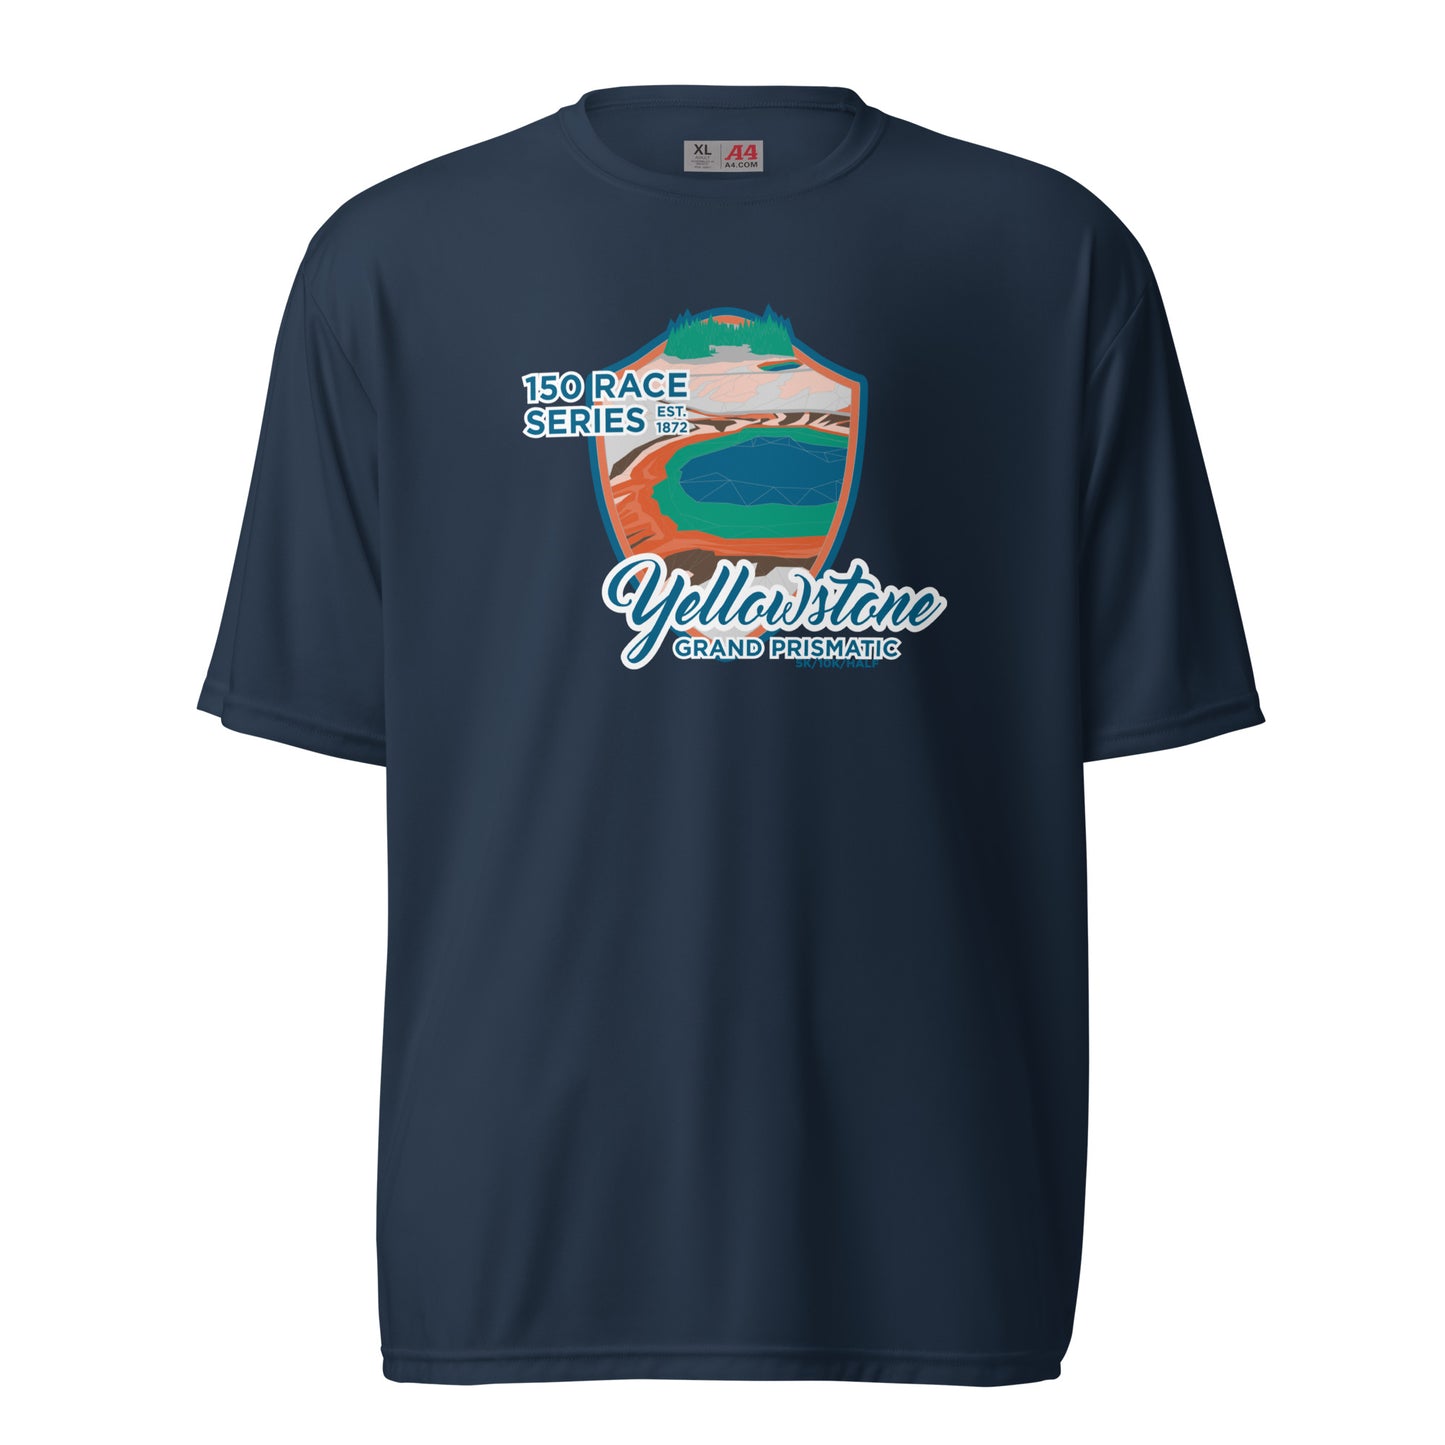 Performance Athletic Grand Prismatic Race Tee - 150 Years of Yellowstone